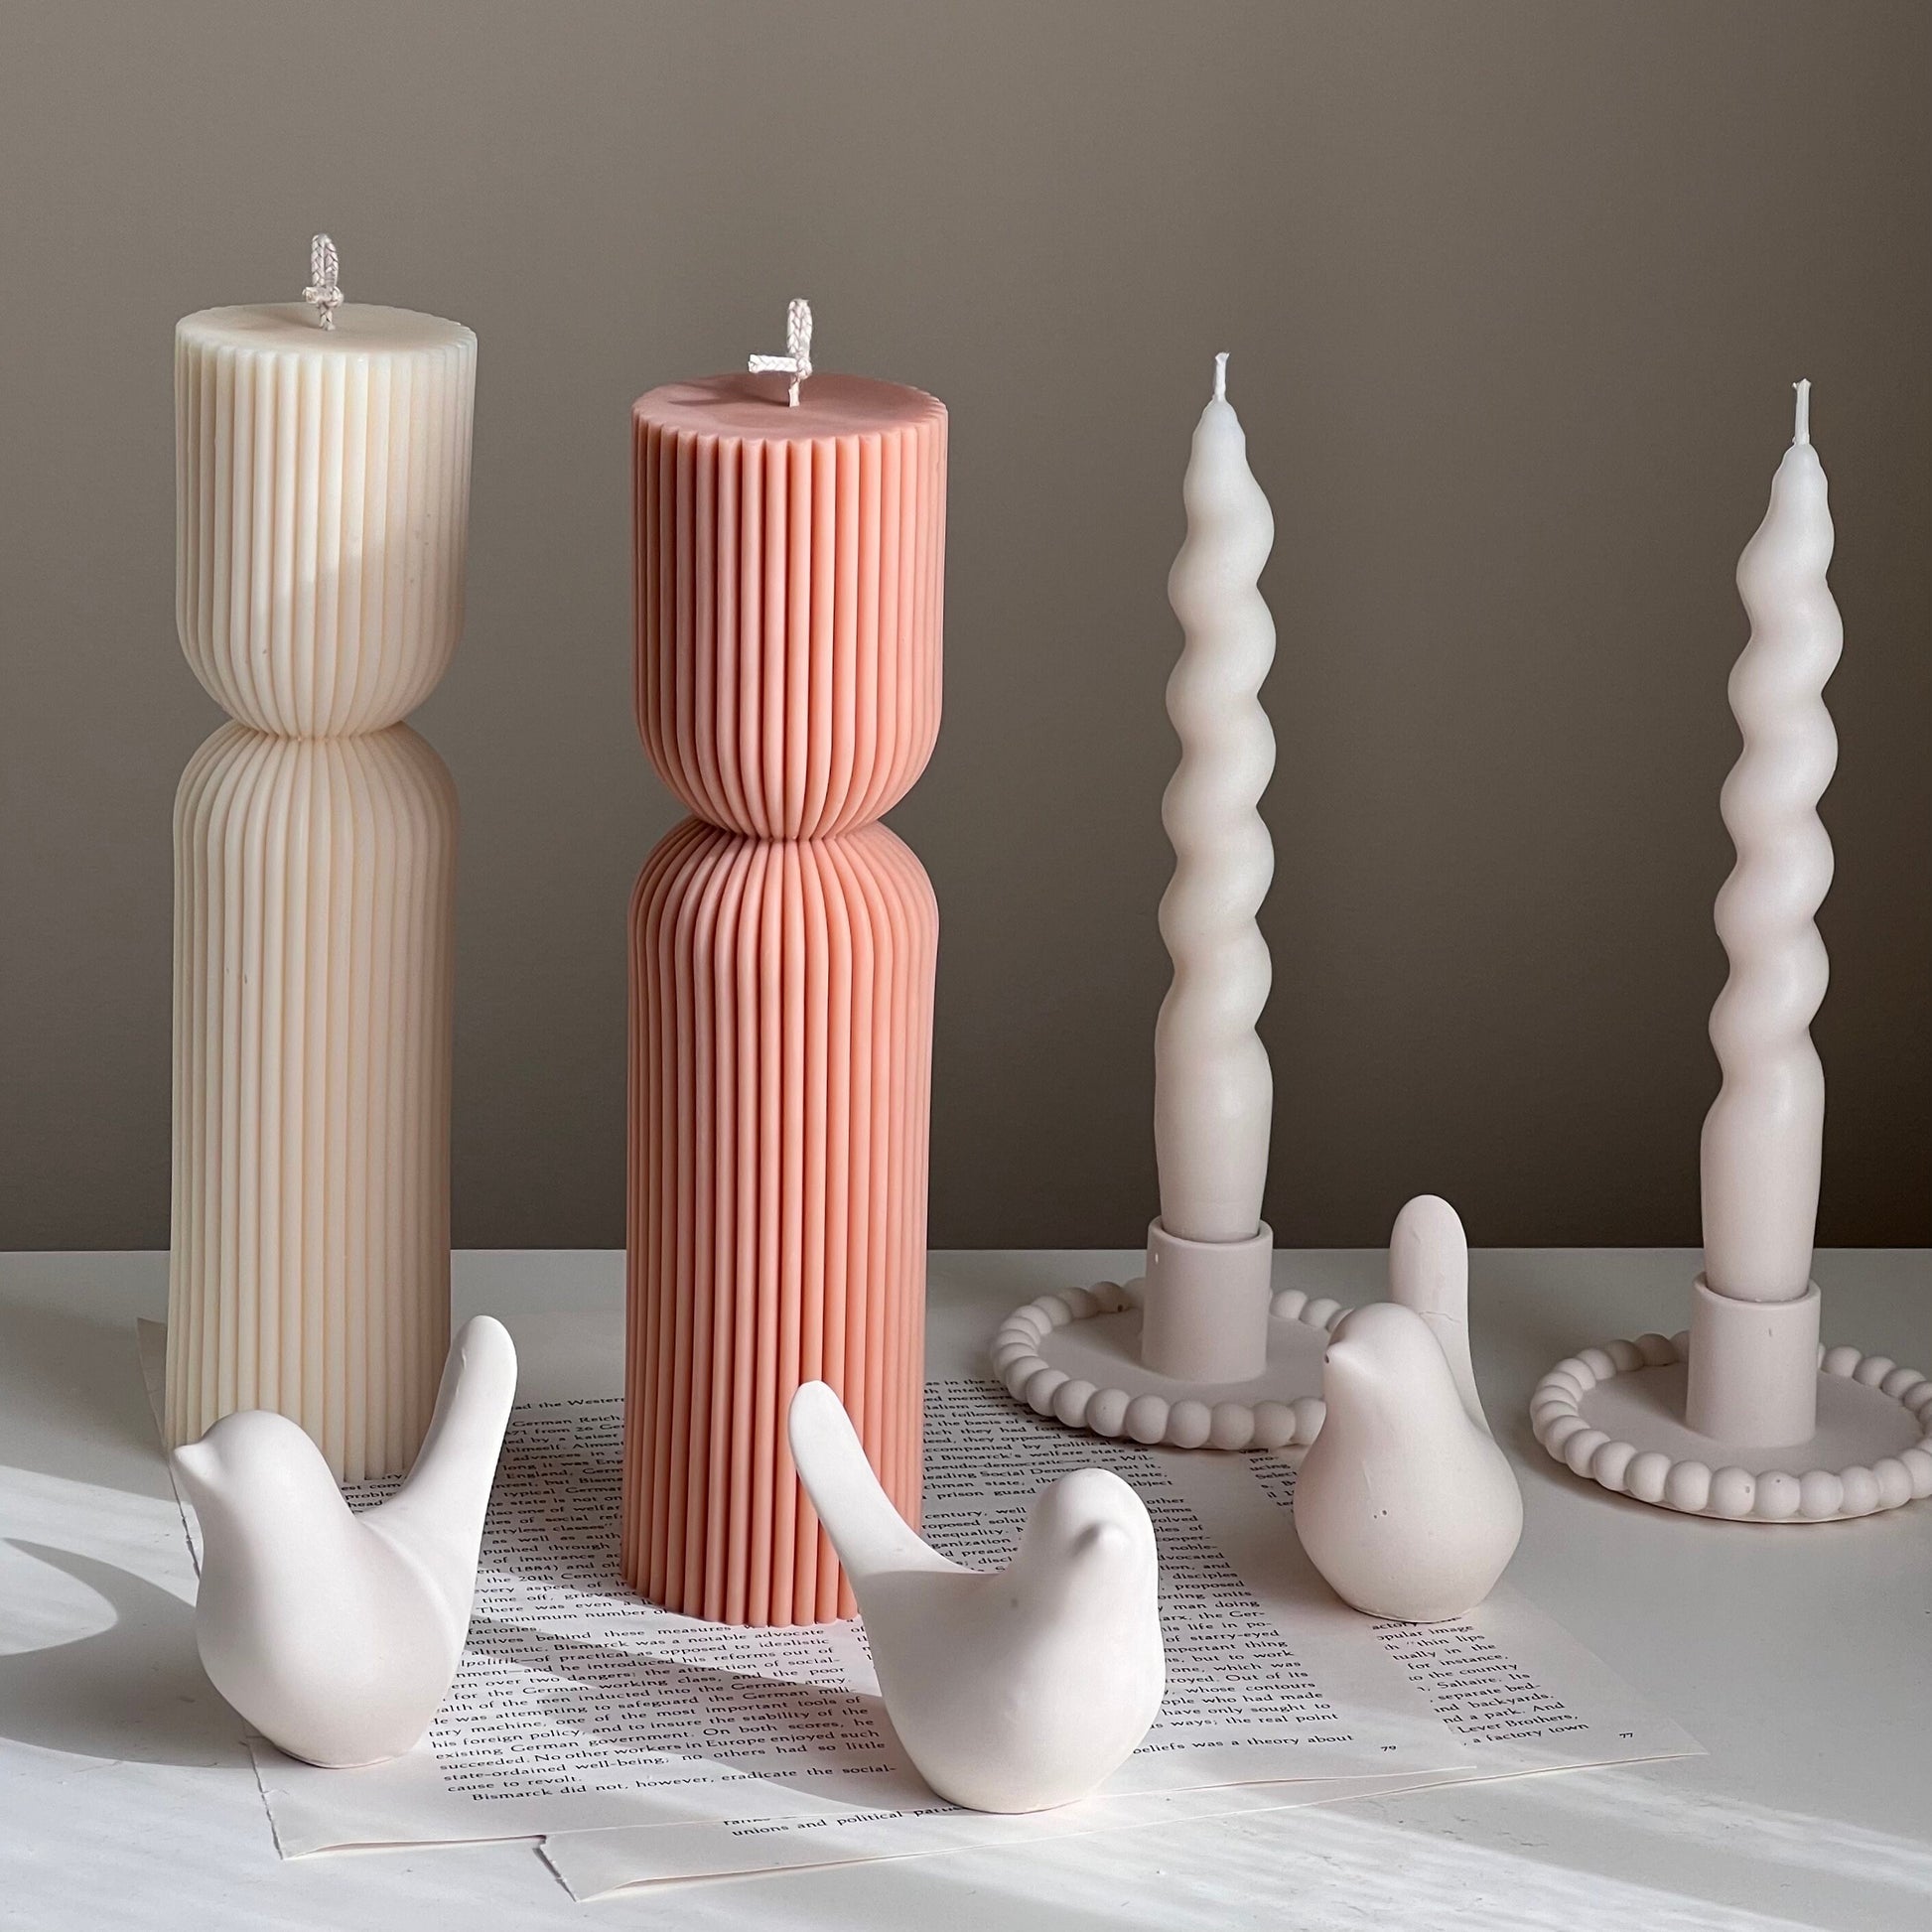 Ribbed Hourglass Pillar Candle| Sculptural Striped Candle| Aesthetic Table Decor| Column Ribbed Candle| Minimalist Decor| Housewarming Gift